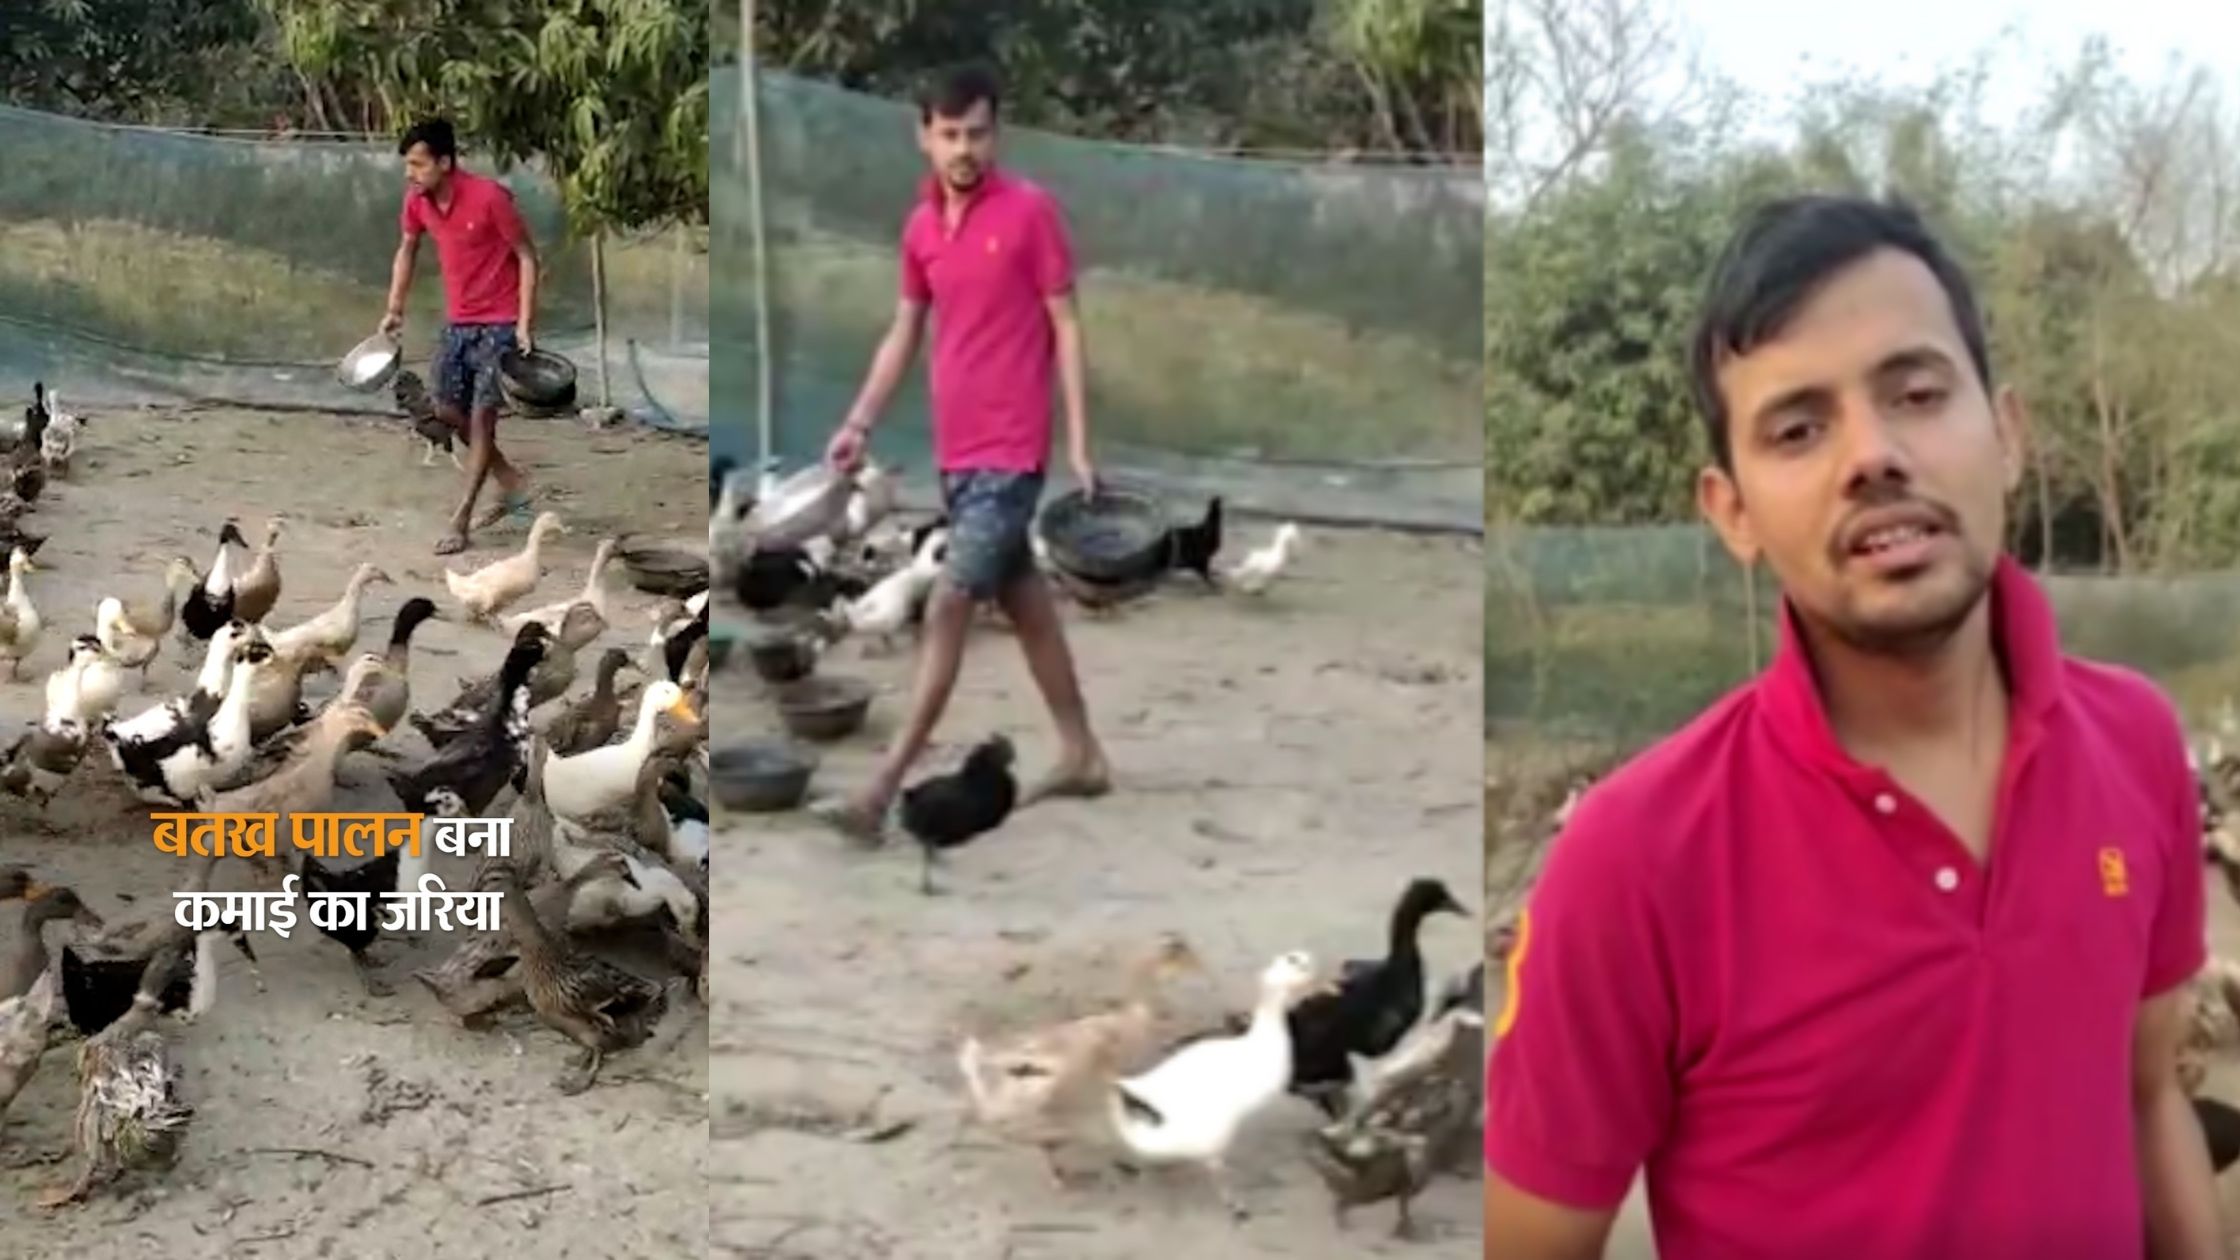 Bihari students studying in BA are earning lakhs from duck rearing